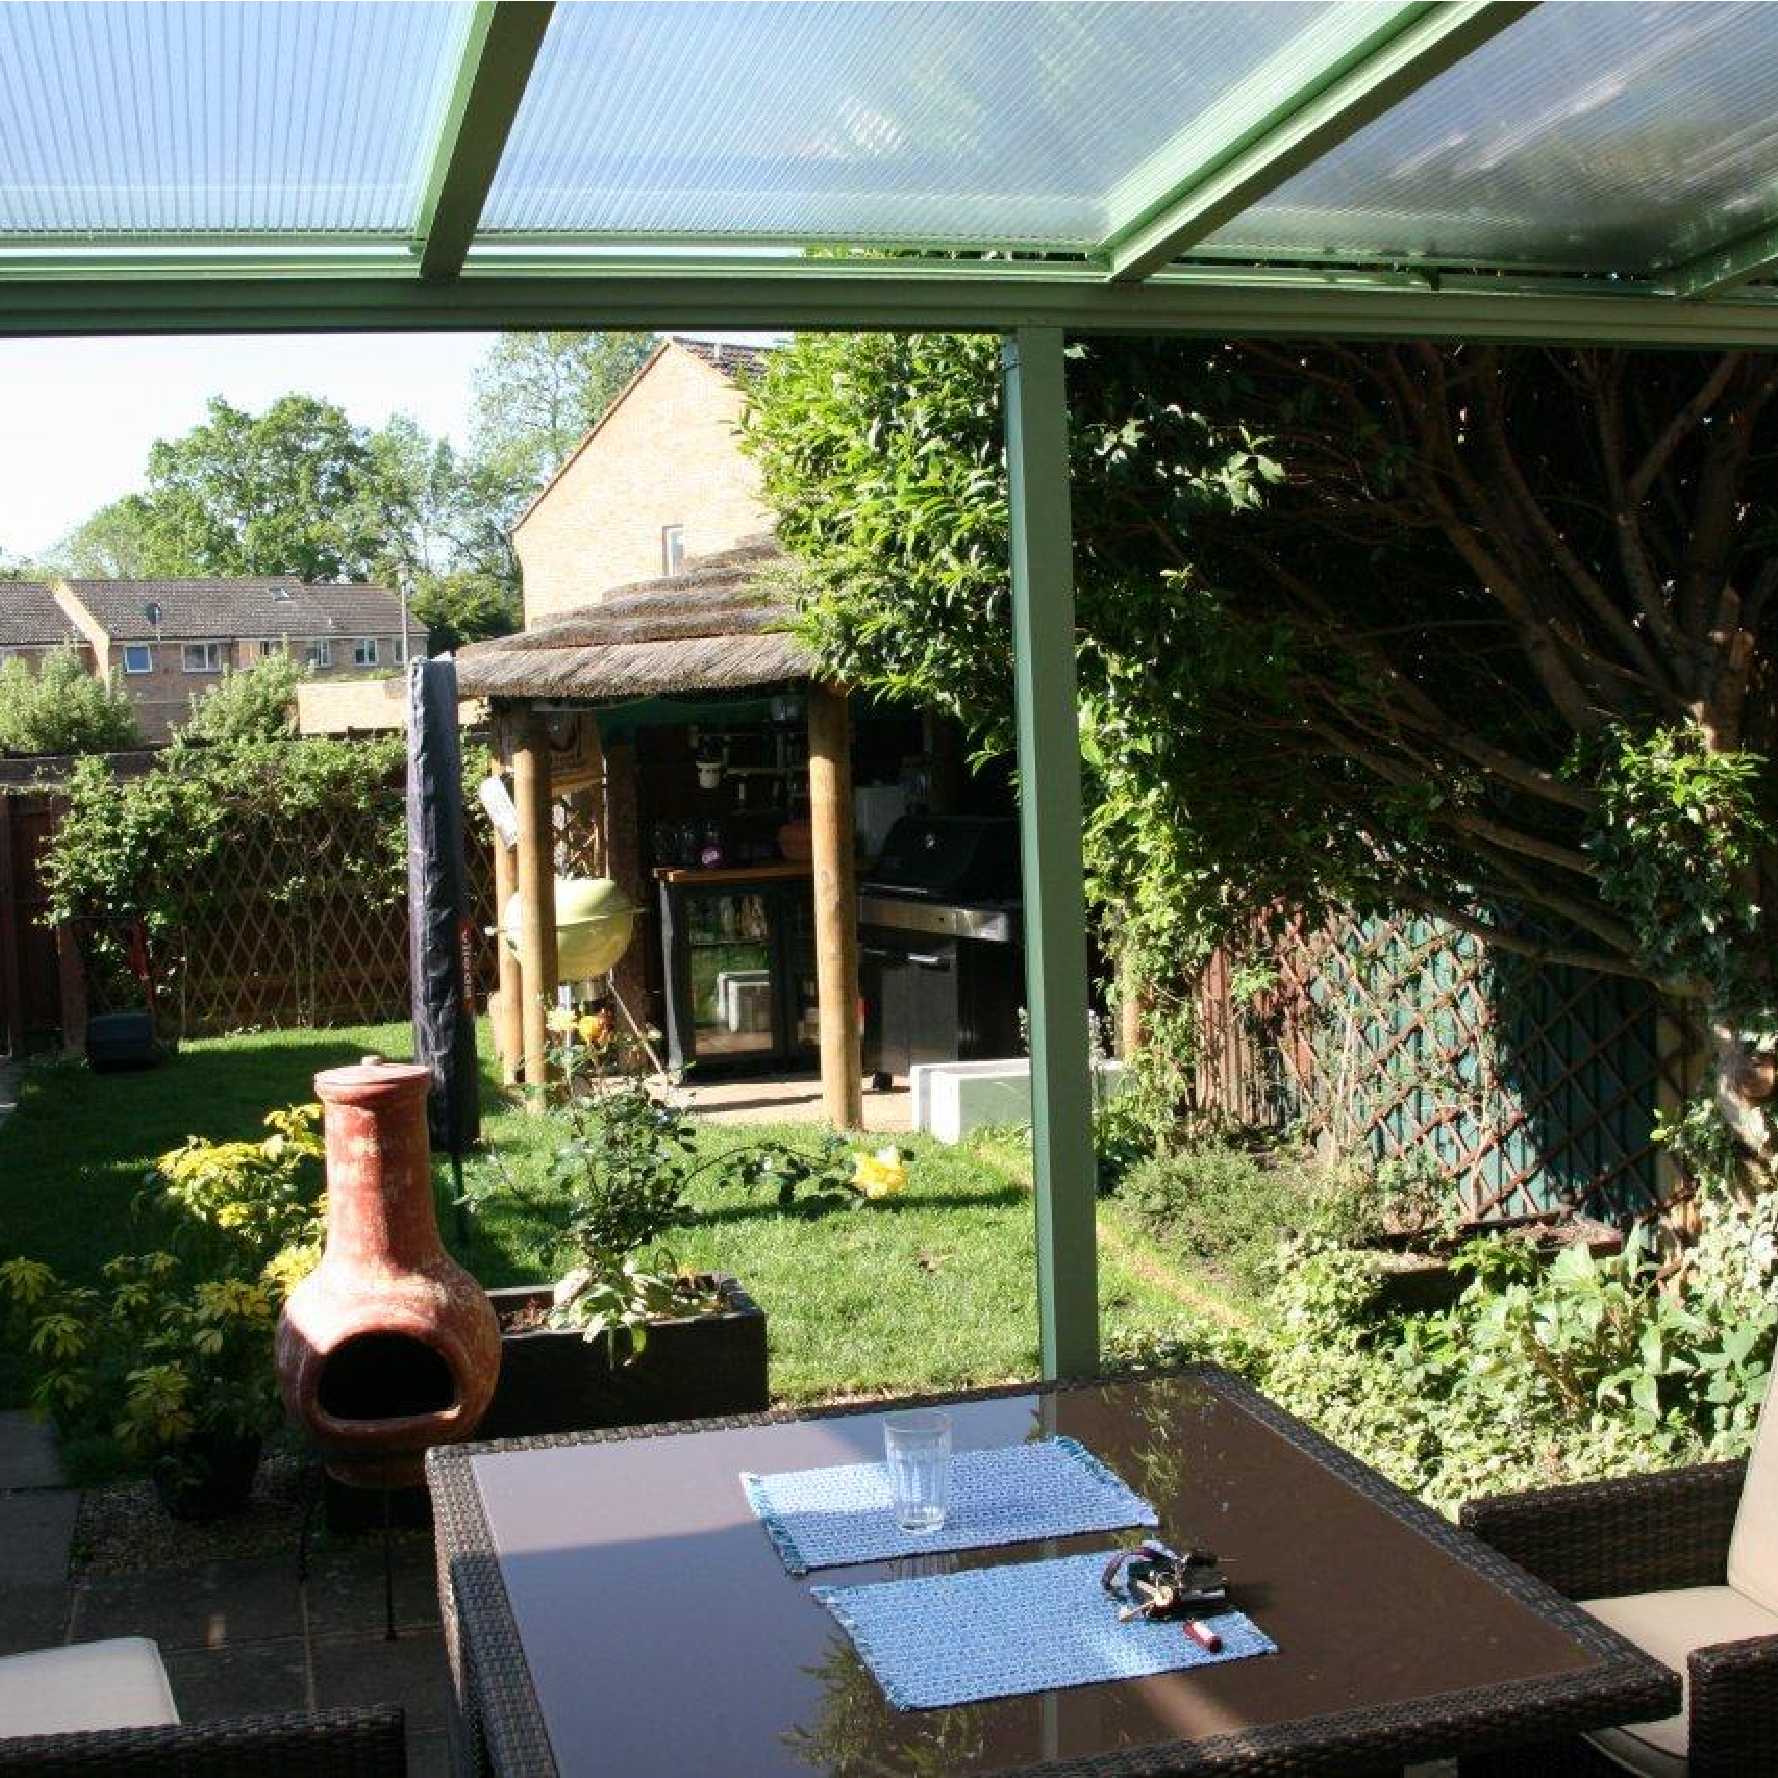 Affordable Omega Smart Lean-To Canopy, White with 16mm Polycarbonate Glazing - 6.0m (W) x 2.0m (P), (3) Supporting Posts